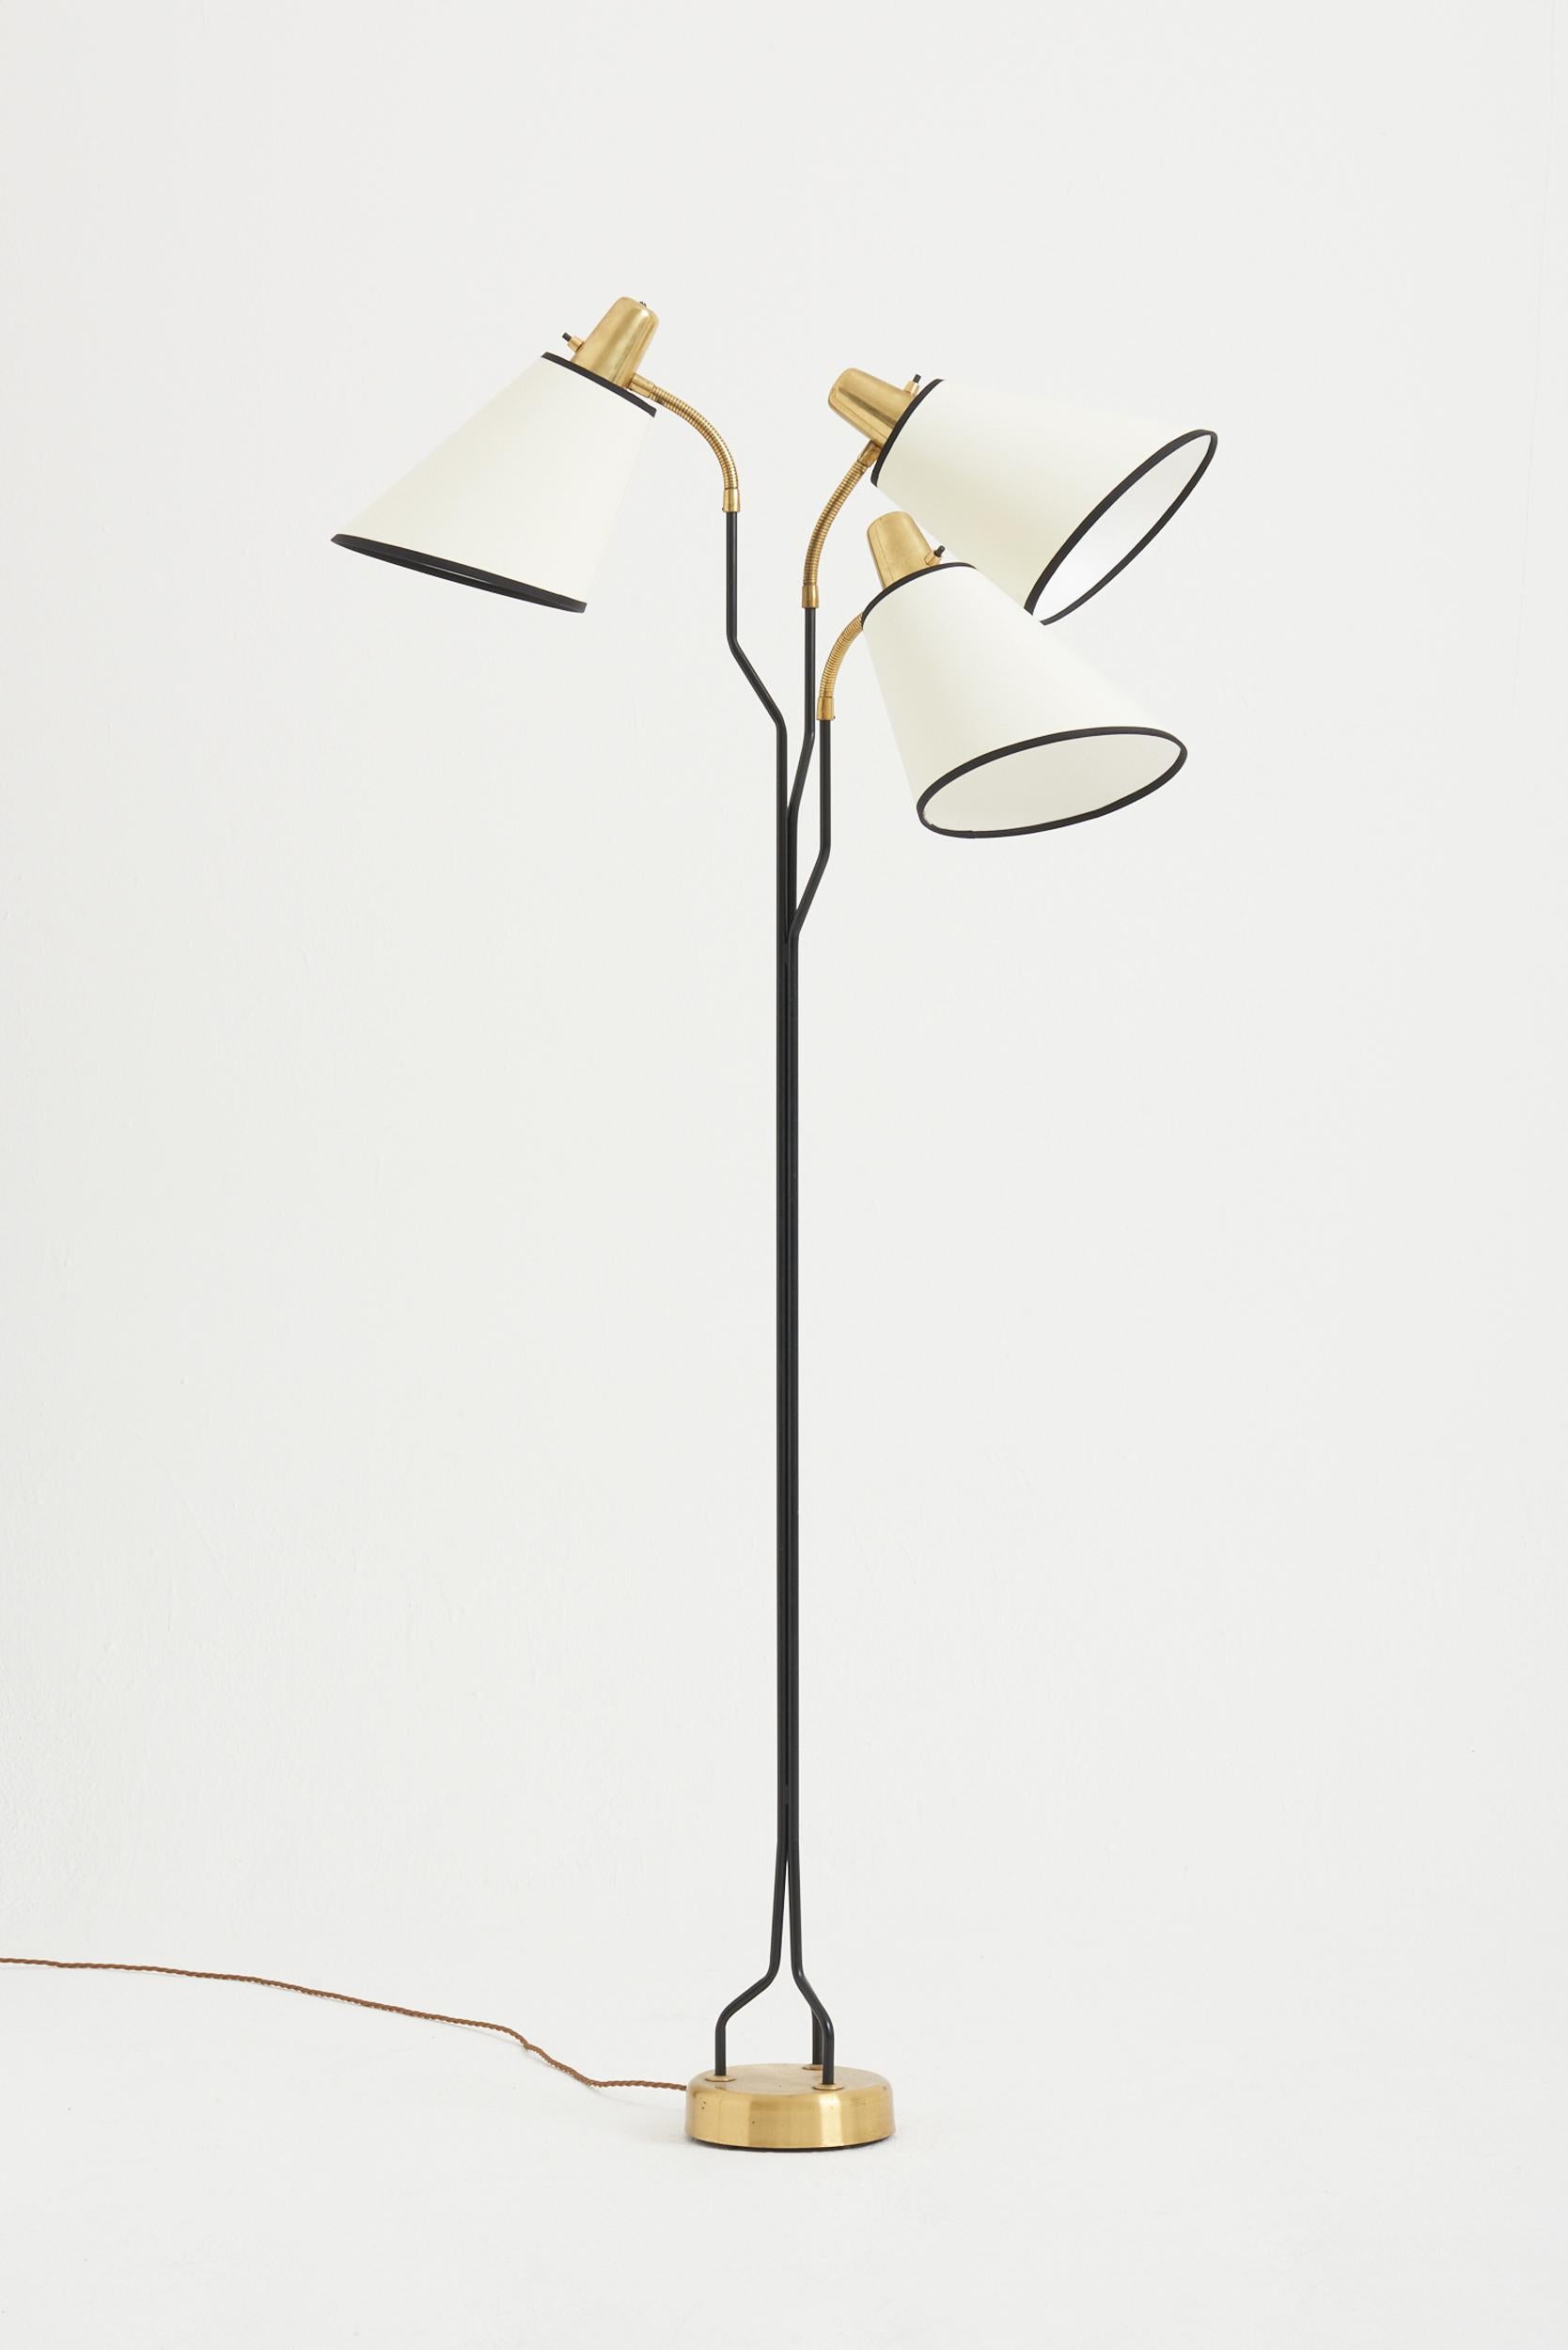 A brass and black enamelled iron three-armed floor lamp.
Sweden, 1950s.
Measures: Overall height:
Diameter of the base: 17 cm 
Diameter of each shade: 22 cm.